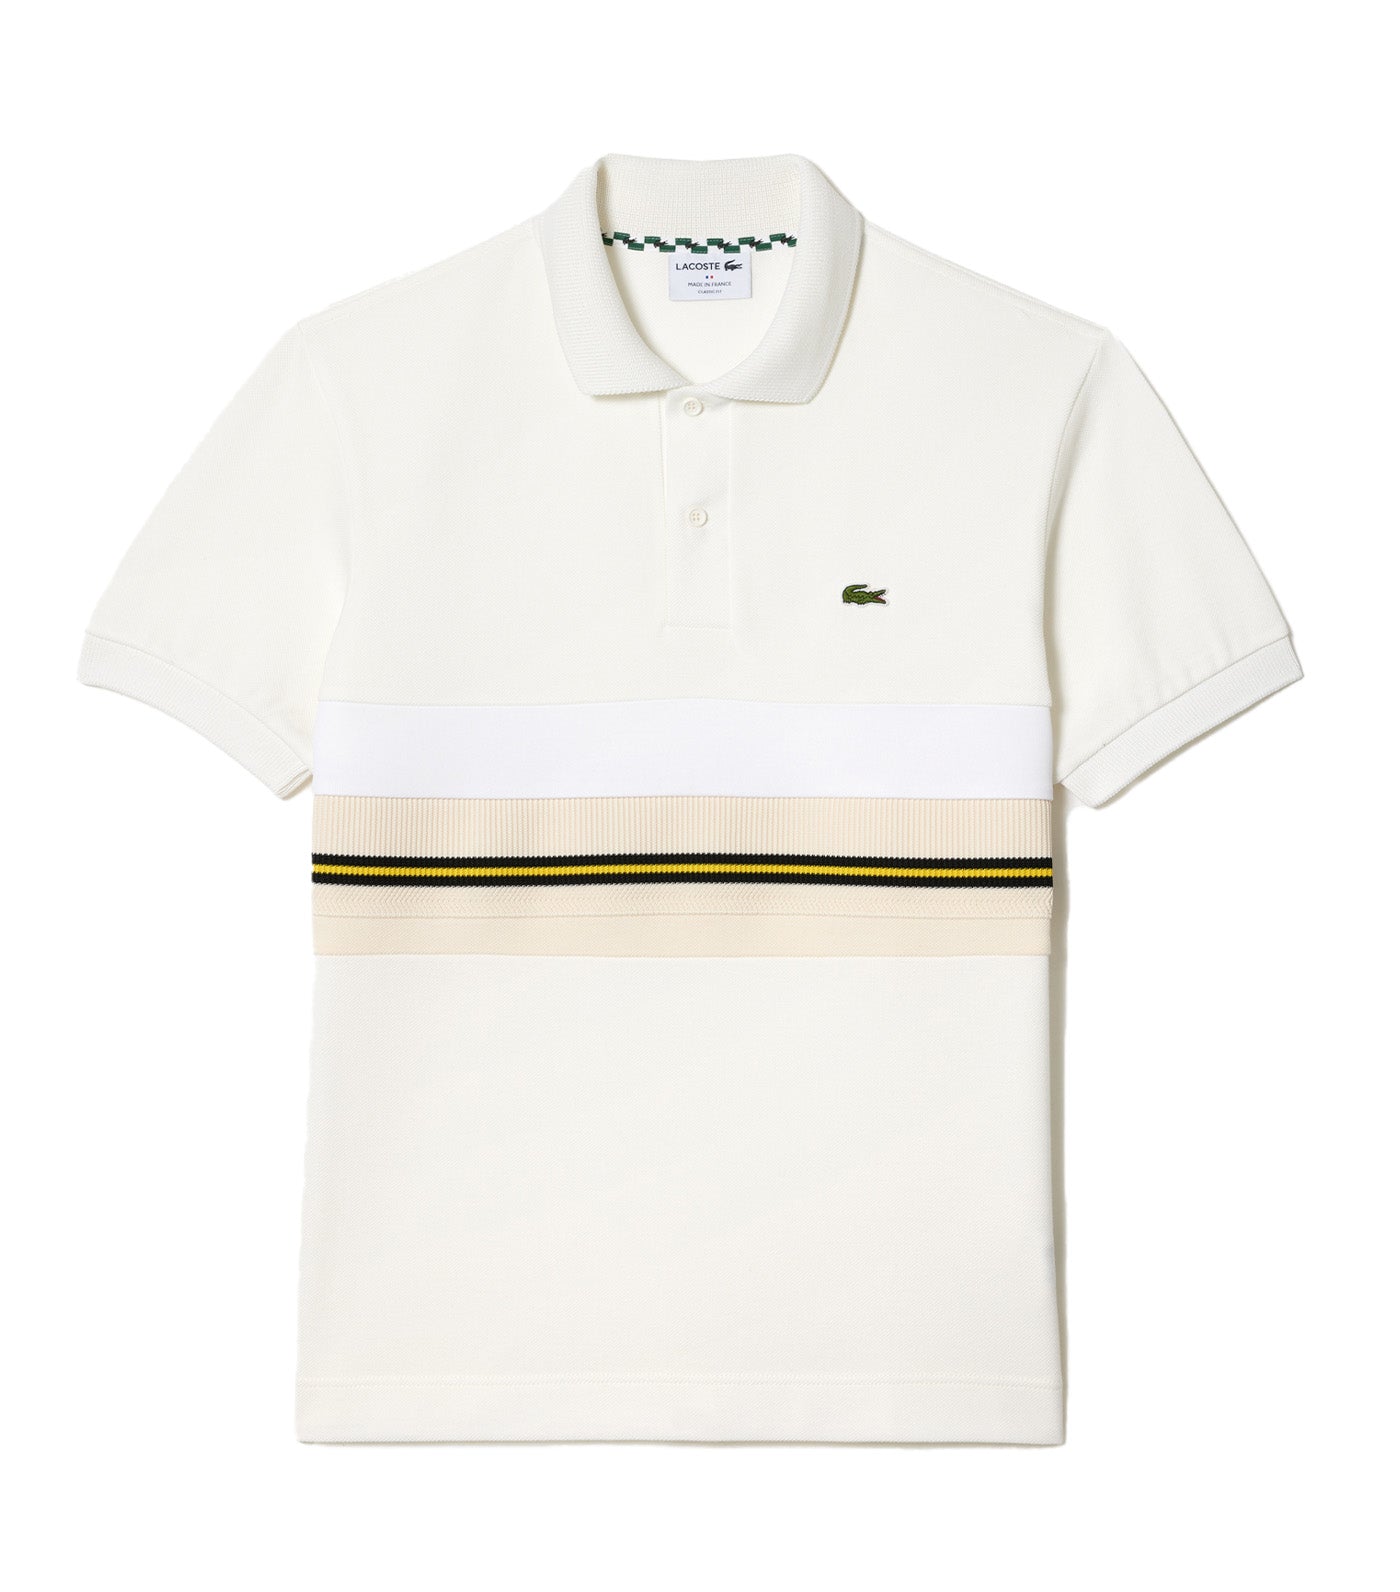 Shirt French Lacoste Stripe Flour Polo Contrast Made